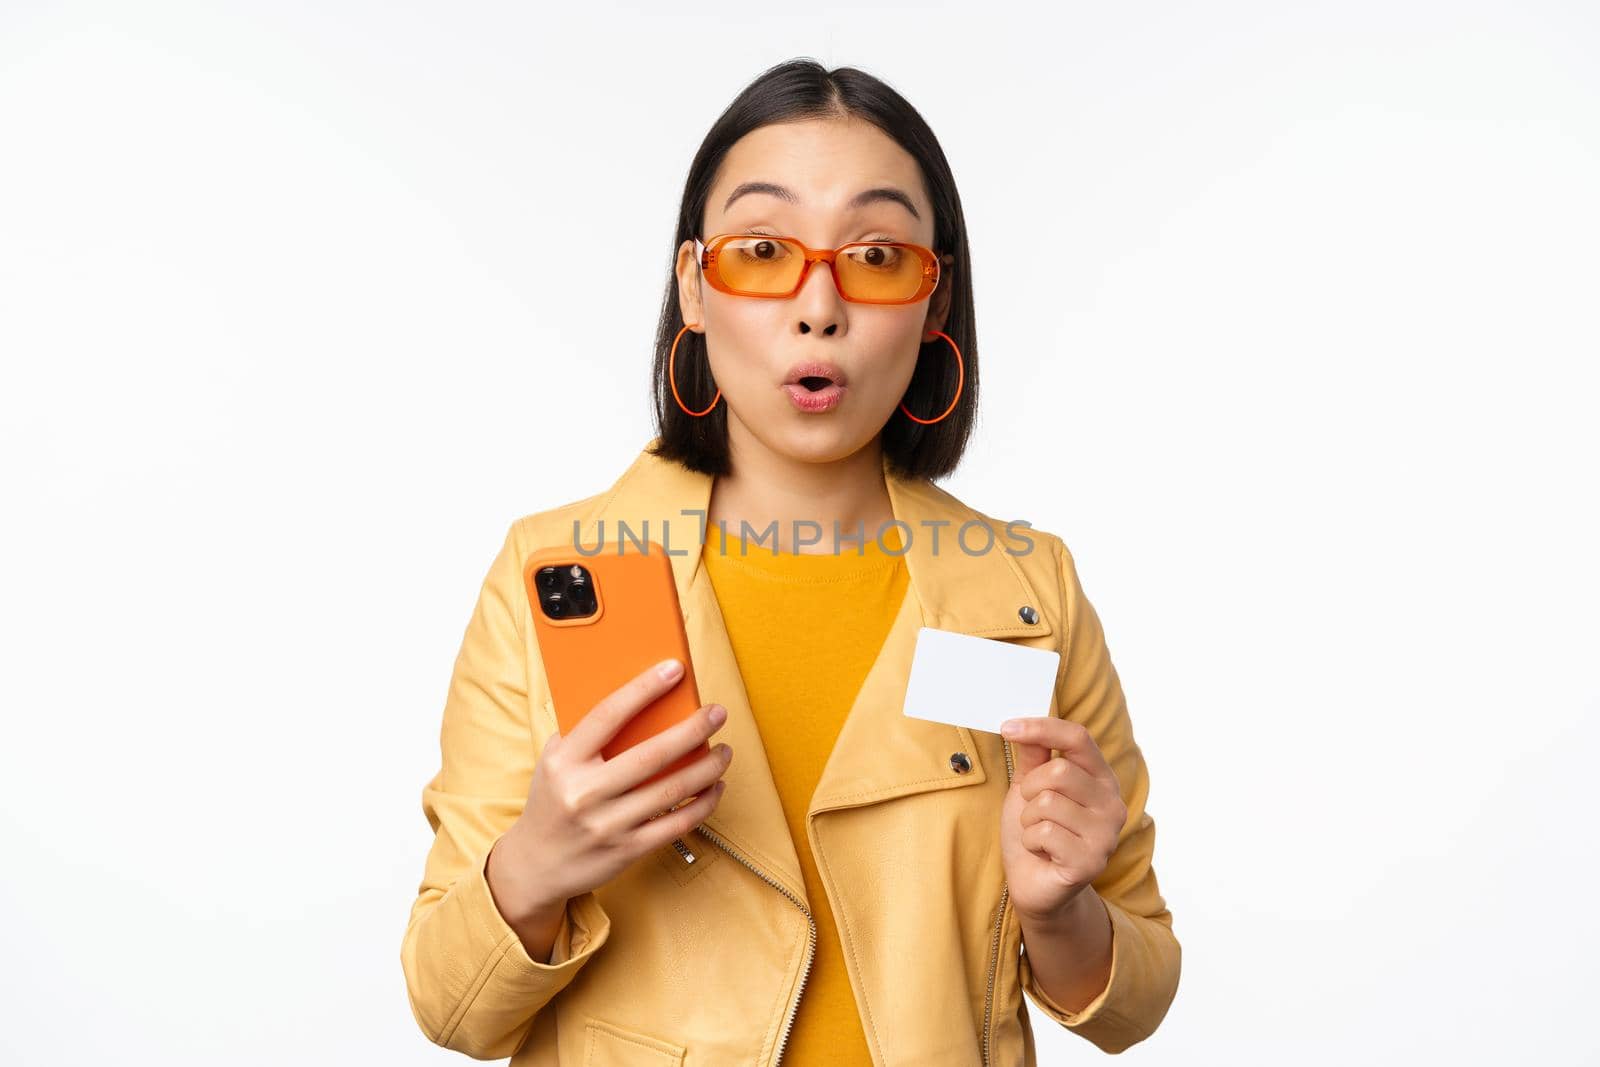 Online shopping. Stylish asian female model in sunglasses, holding credit card and mobile phone, smiling happy, standing over white background. Copy space